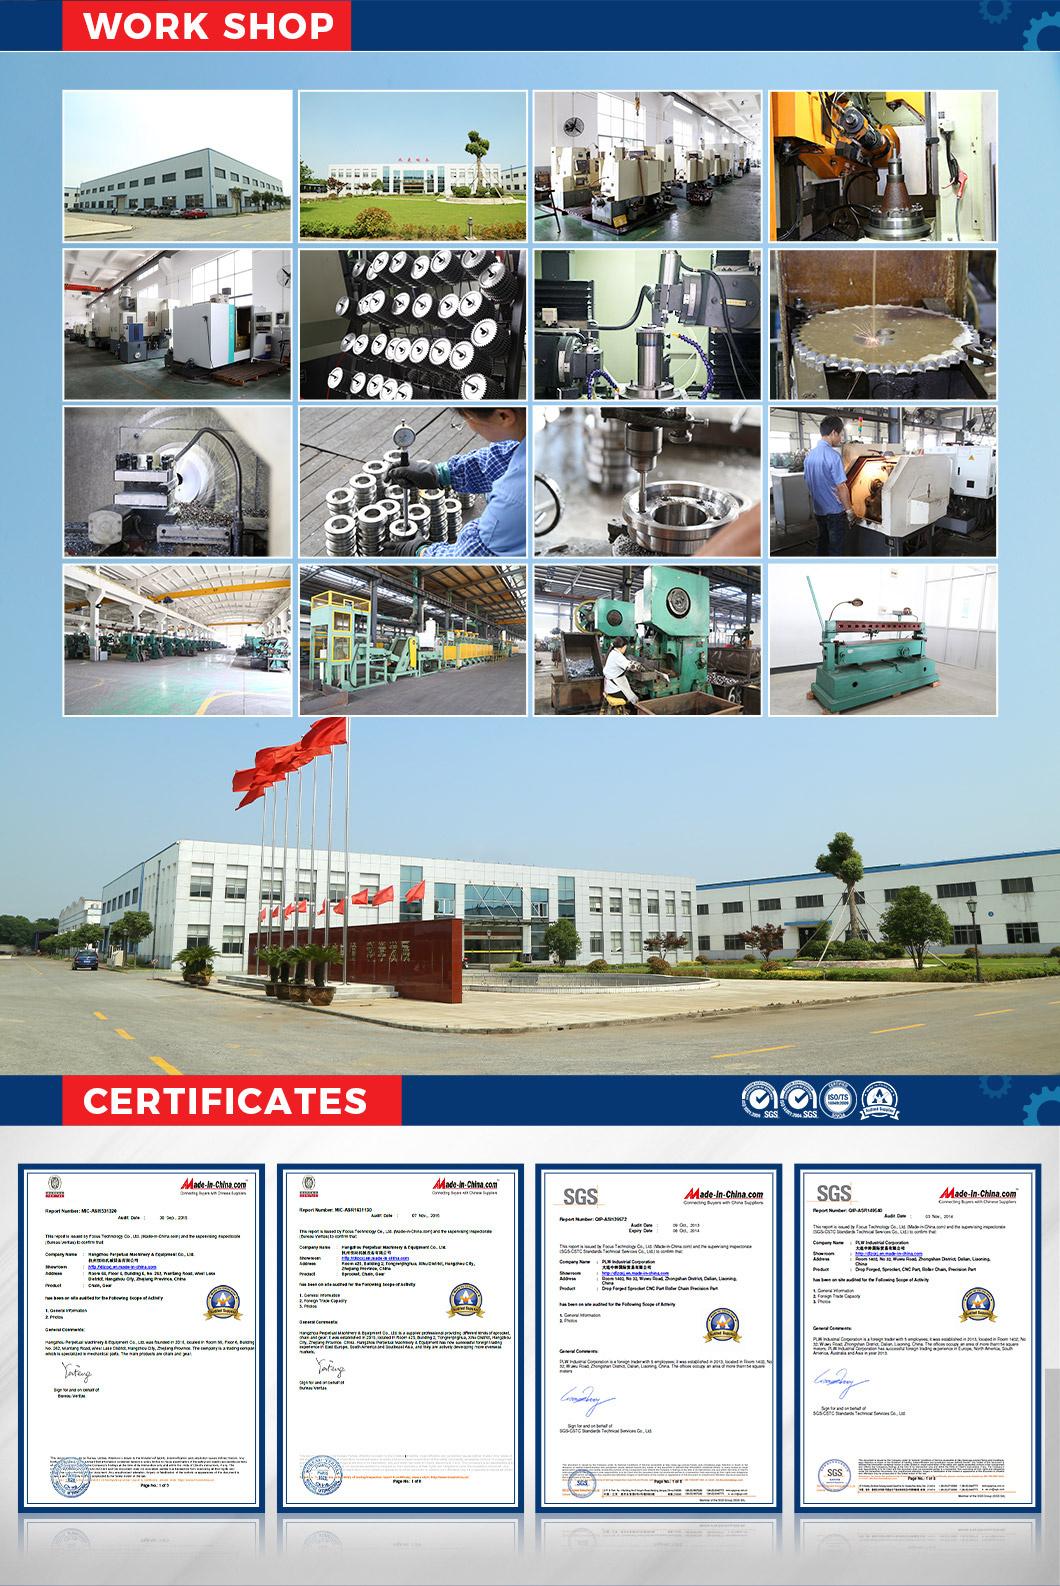 China Made Professional Industrial Transmission Equipment Stainless Steel Industry Sprocket